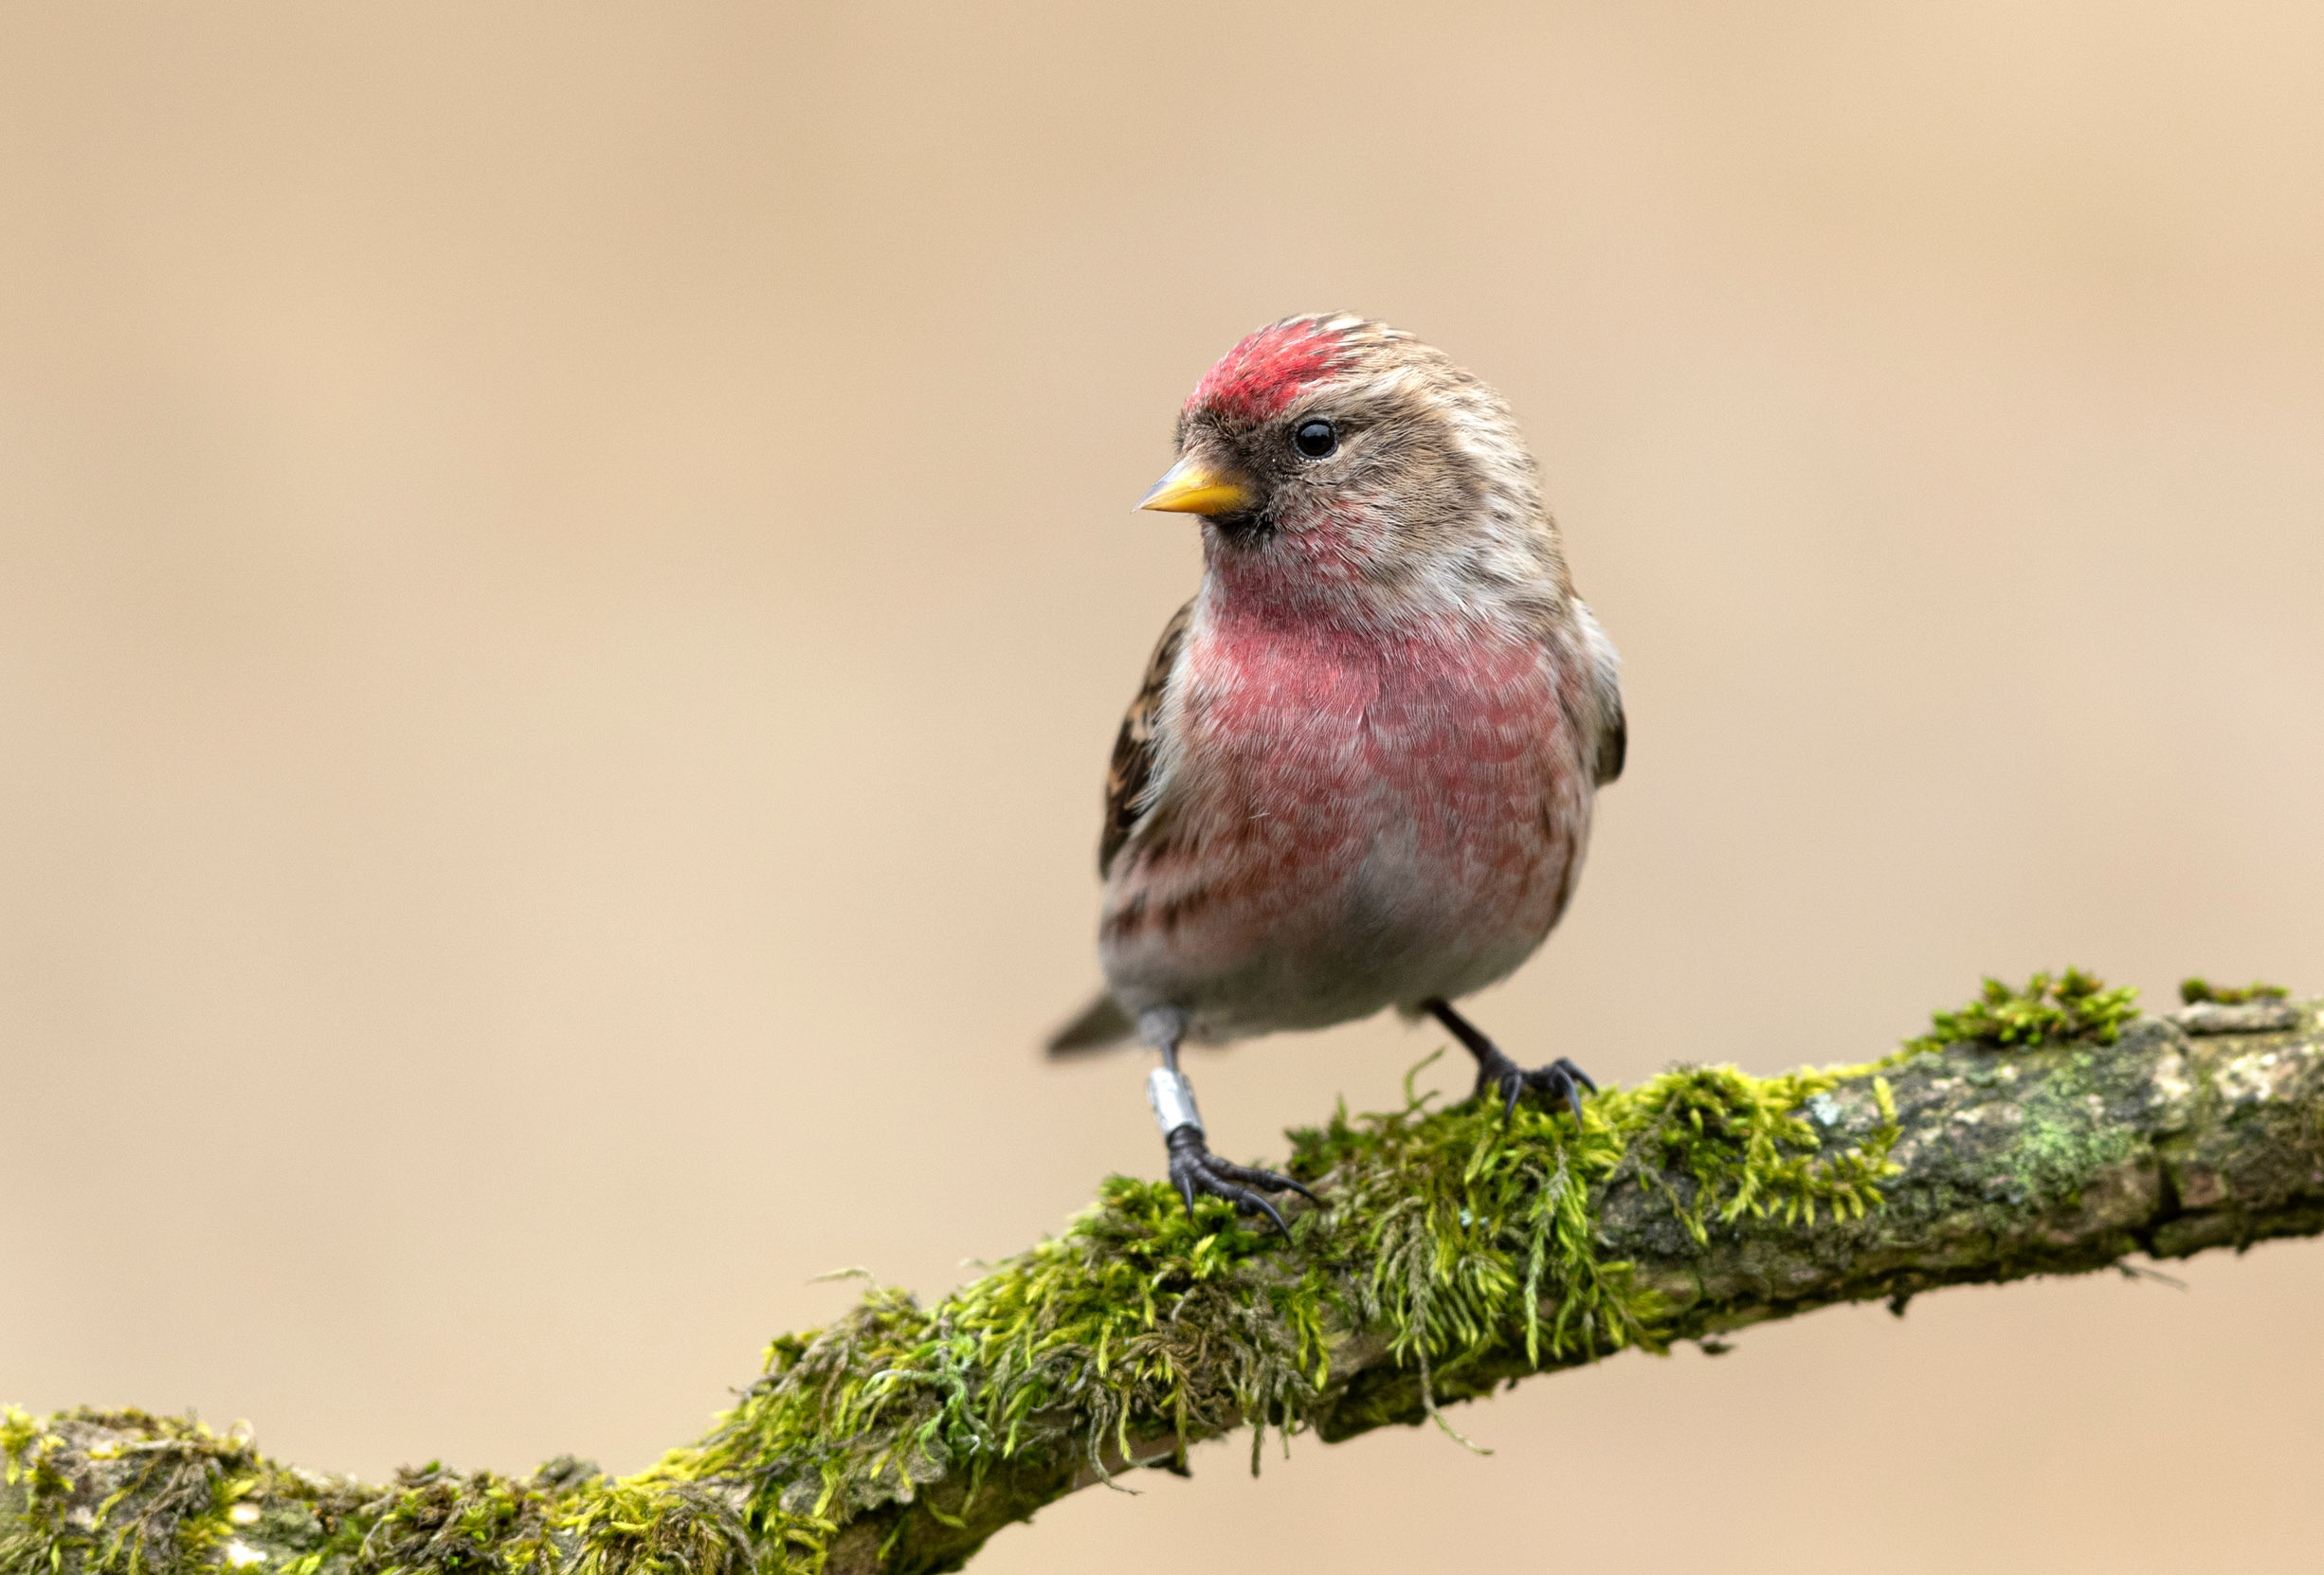 A lone Redpoll perched on a moss covered branch.